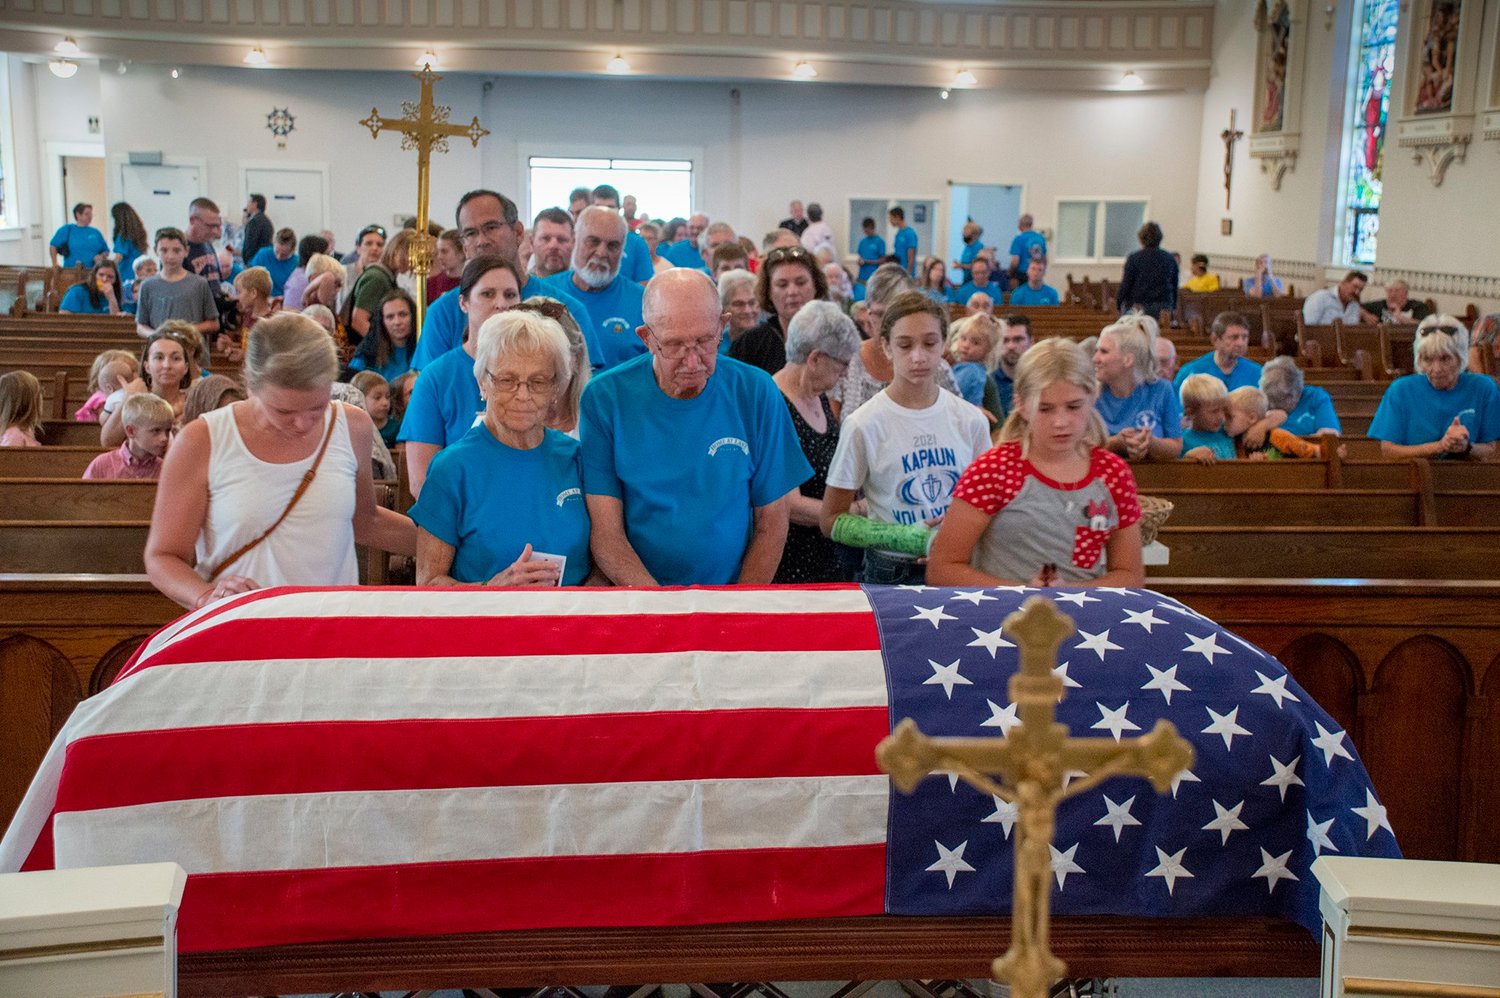 People at St. John Nepomucene Church in Pilsen, Kan., welcome the remains of Father Emil J. Kapaun and pray for his intercession Sept. 25, 2021. A candidate for sainthood, Father Kapaun died May 23, 1951, while ministering to prisoners of war during the Korean War.